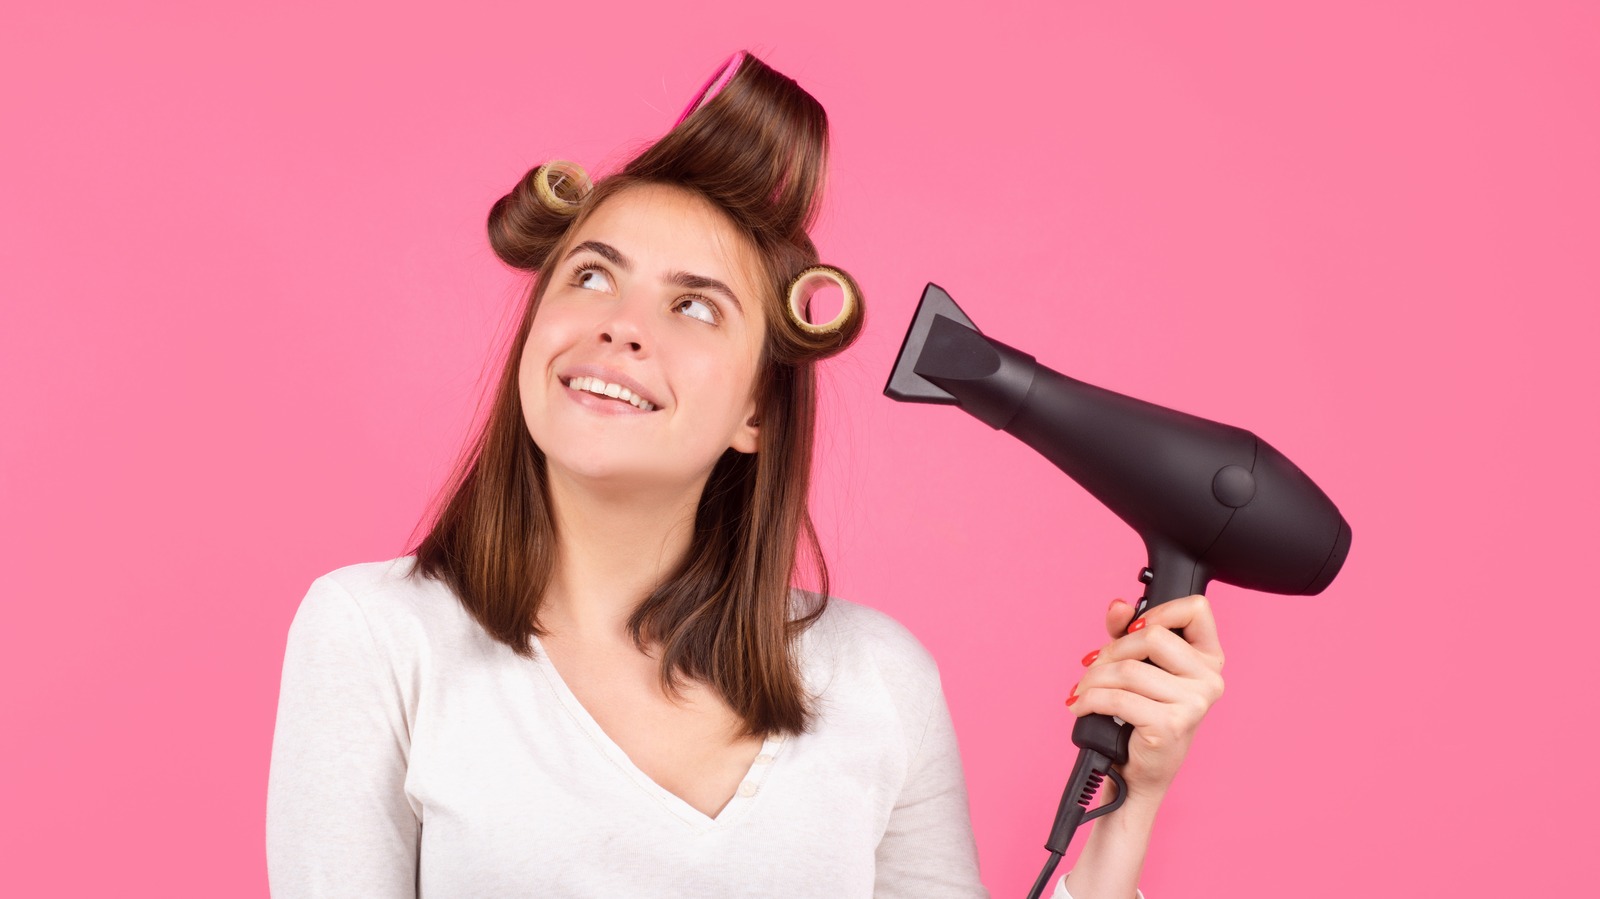 The Most Important Place To Use A Hairdryer That You're Probably Missing